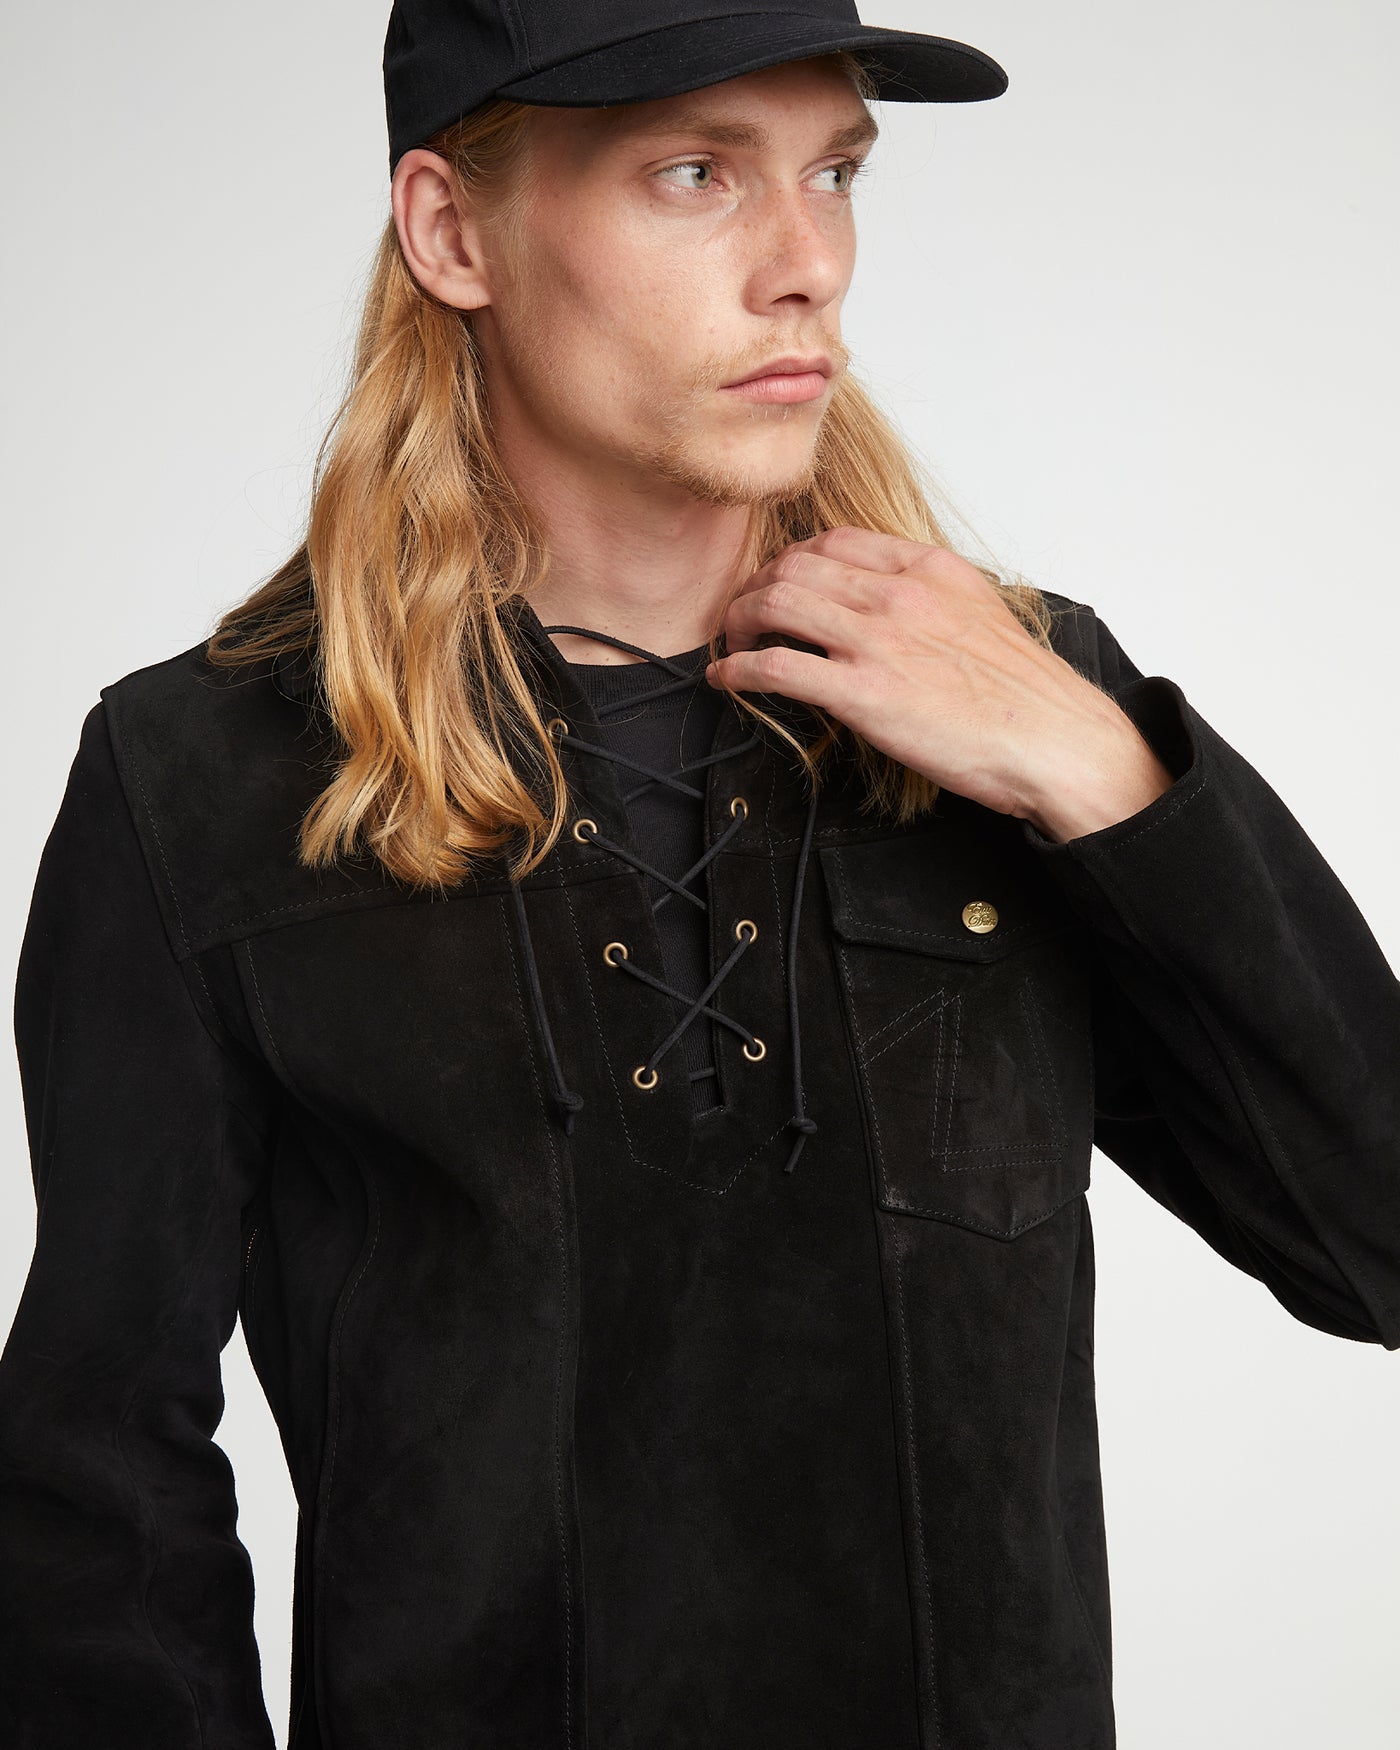 Outlaw Shirt Leather Black